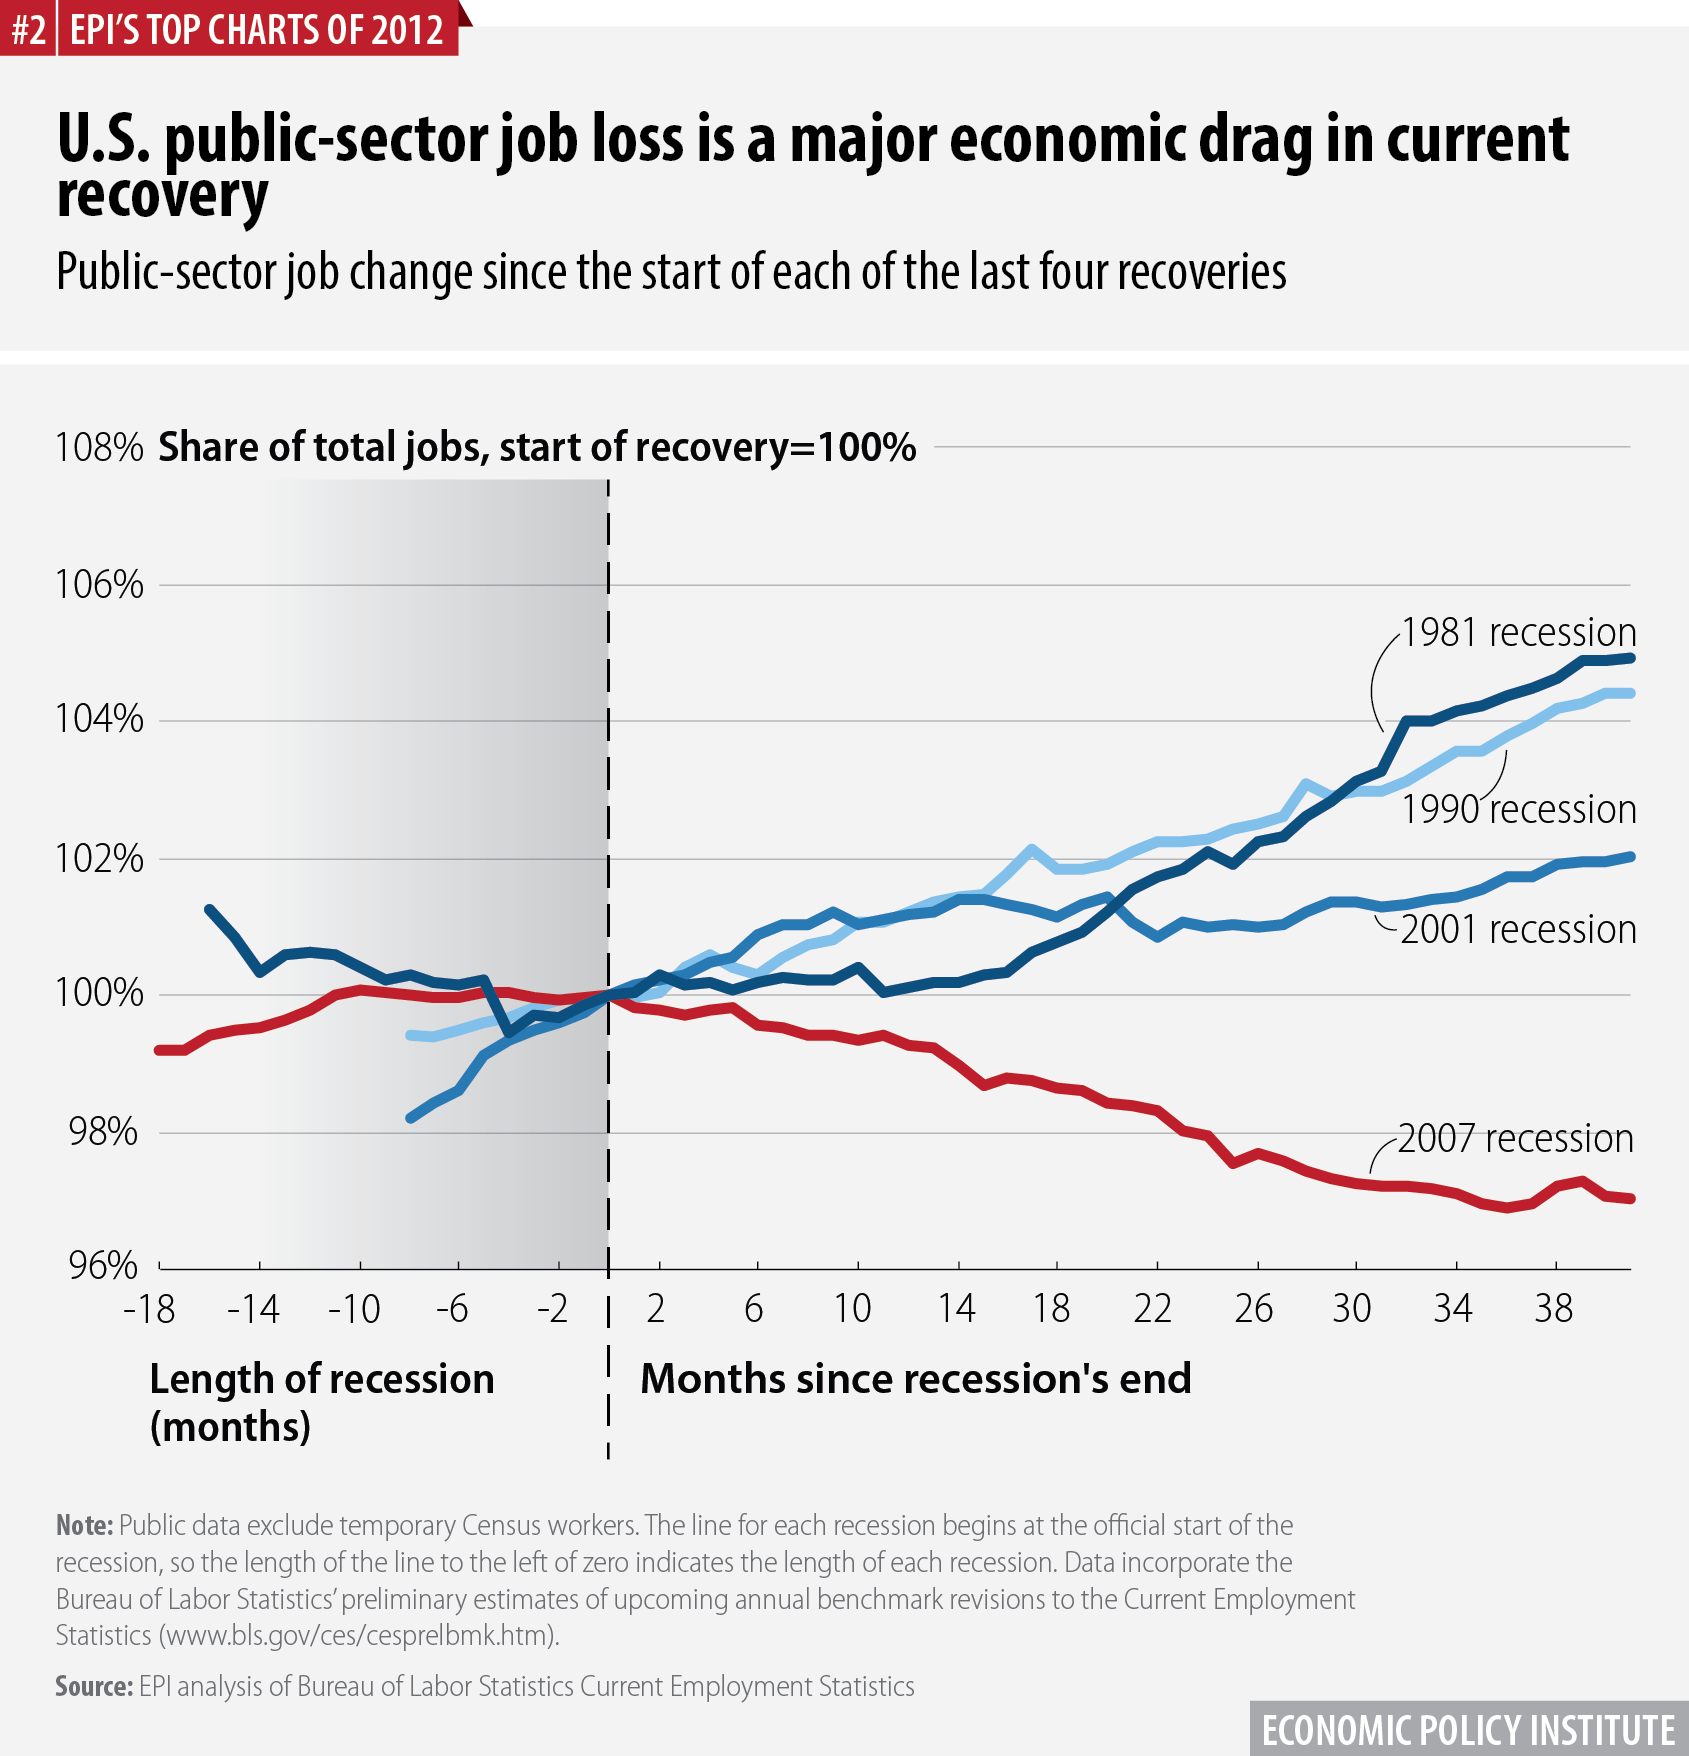 U.S. public-sector job loss is a major economic drag in current recovery | Public-sector job change since the start of each of the last four recoveries